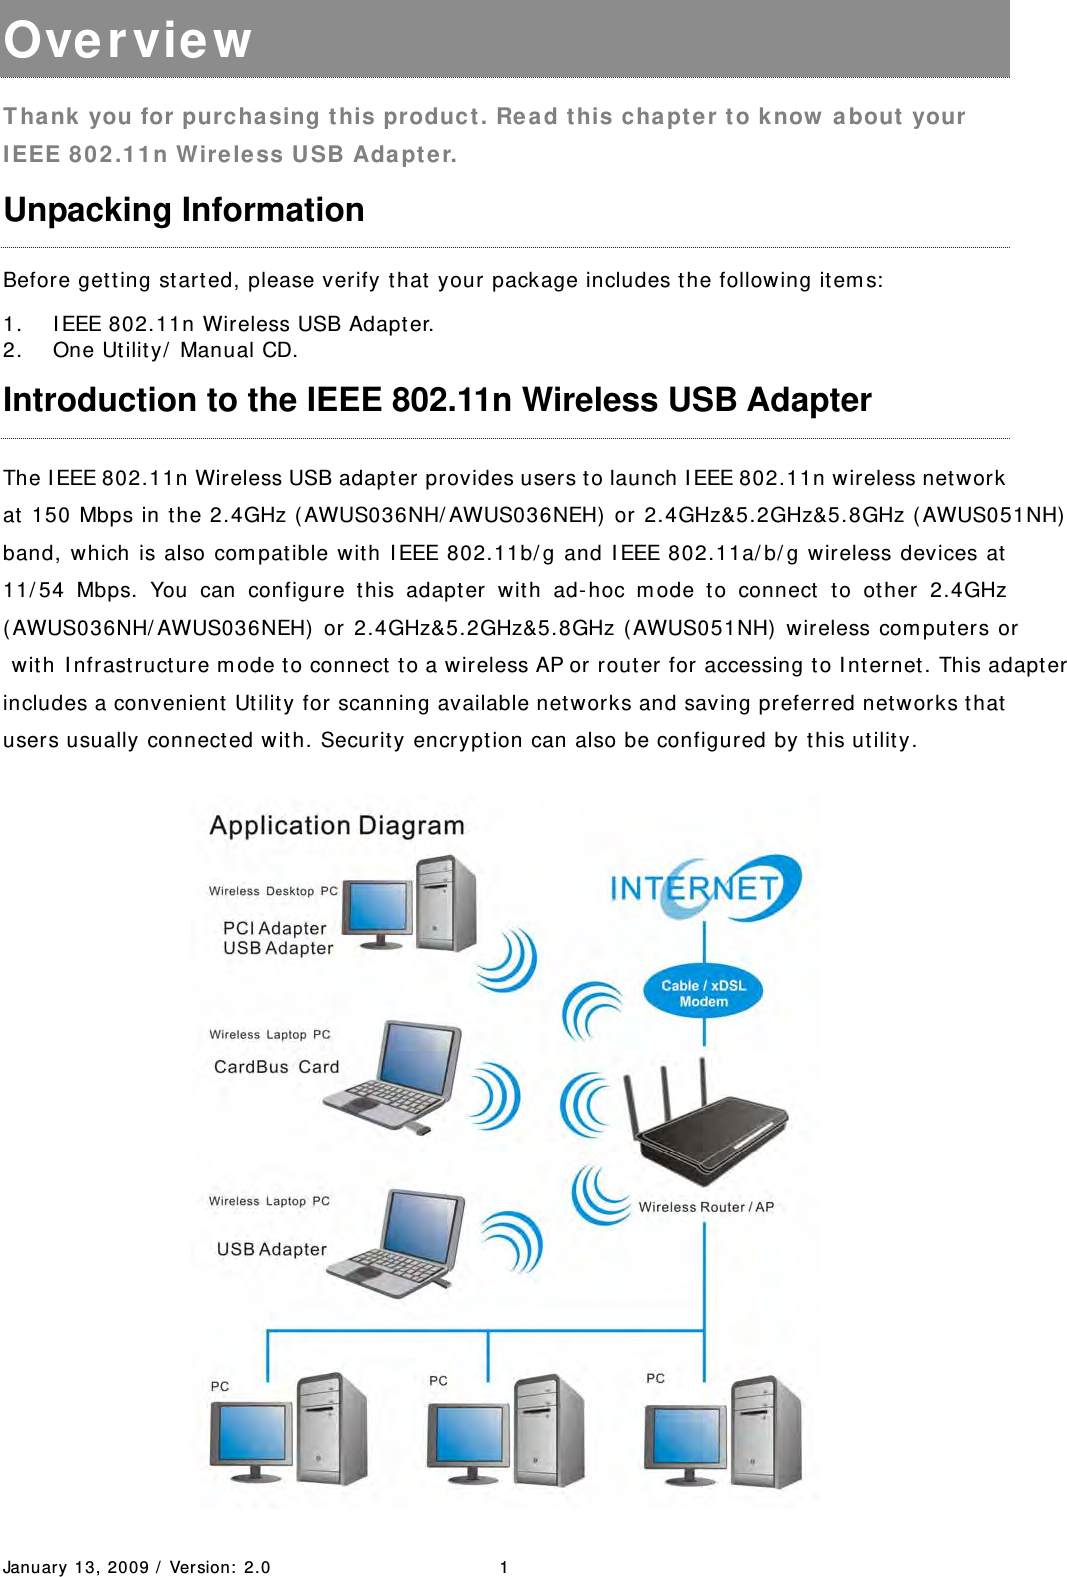 January 13, 2009 /  Ver sion:  2.0 1 Overview  T hank  you for purchasing t his product . Re ad this cha pte r to know  a bout  your IEEE 8 02 .1 1n Wirele ss USB Ada pte r. Unpacking Information Before gett ing started, please verify that  your package includes t he follow ing item s:  1. I EEE 802.11n Wireless USB Adapter. 2. One Utilit y/  Manual CD. Introduction to the IEEE 802.11n Wireless USB Adapter The I EEE 802.11n Wireless USB adapter provides users to launch I EEE 802.11n wireless net work at  150 Mbps in t he 2.4GHz ( AWUS036NH/ AWUS036NEH) or 2.4GHz&amp;5.2GHz&amp;5.8GHz ( AWUS051NH) band, which is also com pat ible wit h I EEE 802.11b/ g and I EEE 802.11a/ b/ g wireless devices at 11/ 54 Mbps. You can configure t his adapt er wit h ad- hoc m ode to connect t o ot her 2.4GHz ( AWUS036NH/ AWUS036NEH)  or 2.4GHz&amp;5.2GHz&amp;5.8GHz ( AWUS051NH)  wireless com put ers or wit h I nfrast ructure m ode t o connect t o a wireless AP or router for accessing t o I nt ernet . This adapt er includes a convenient  Utilit y for scanning available net works and saving preferred networks t hat  users usually connect ed with. Security encryption can also be configured by t his ut ilit y.  